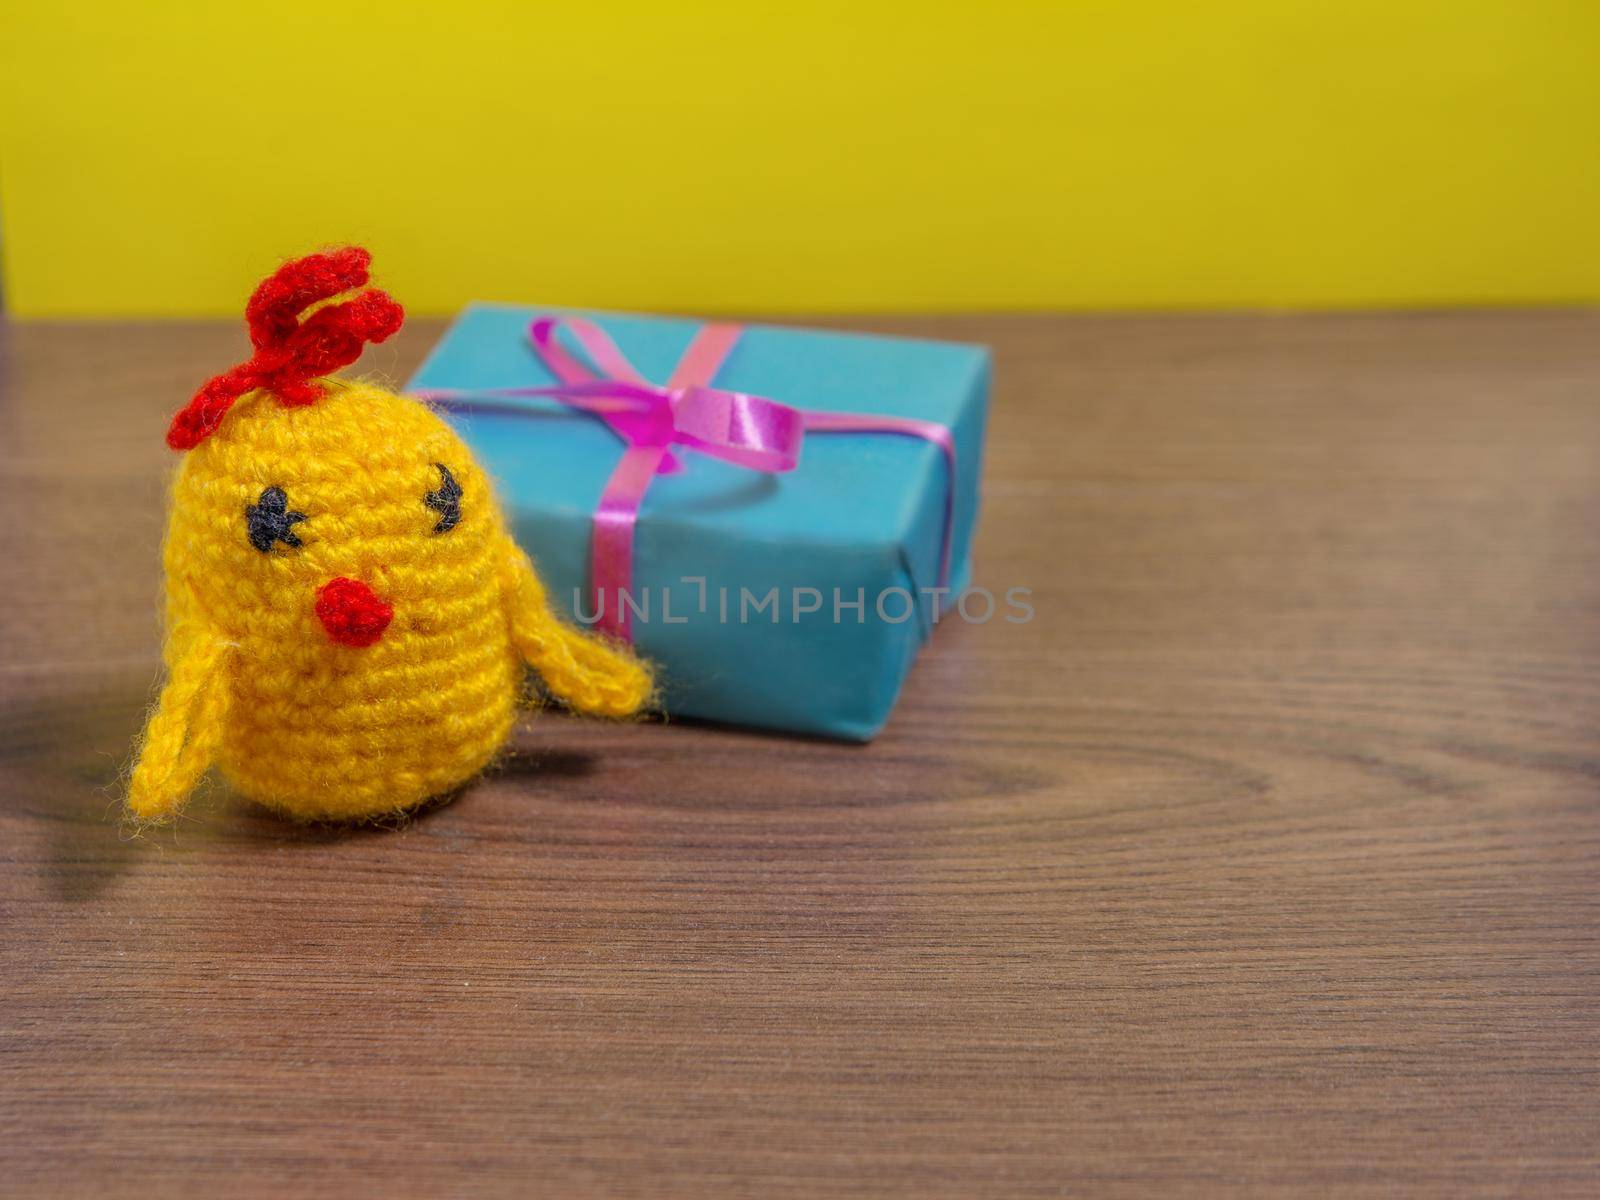 Toy yellow chicken next to gift in blue wrapper on brown table.